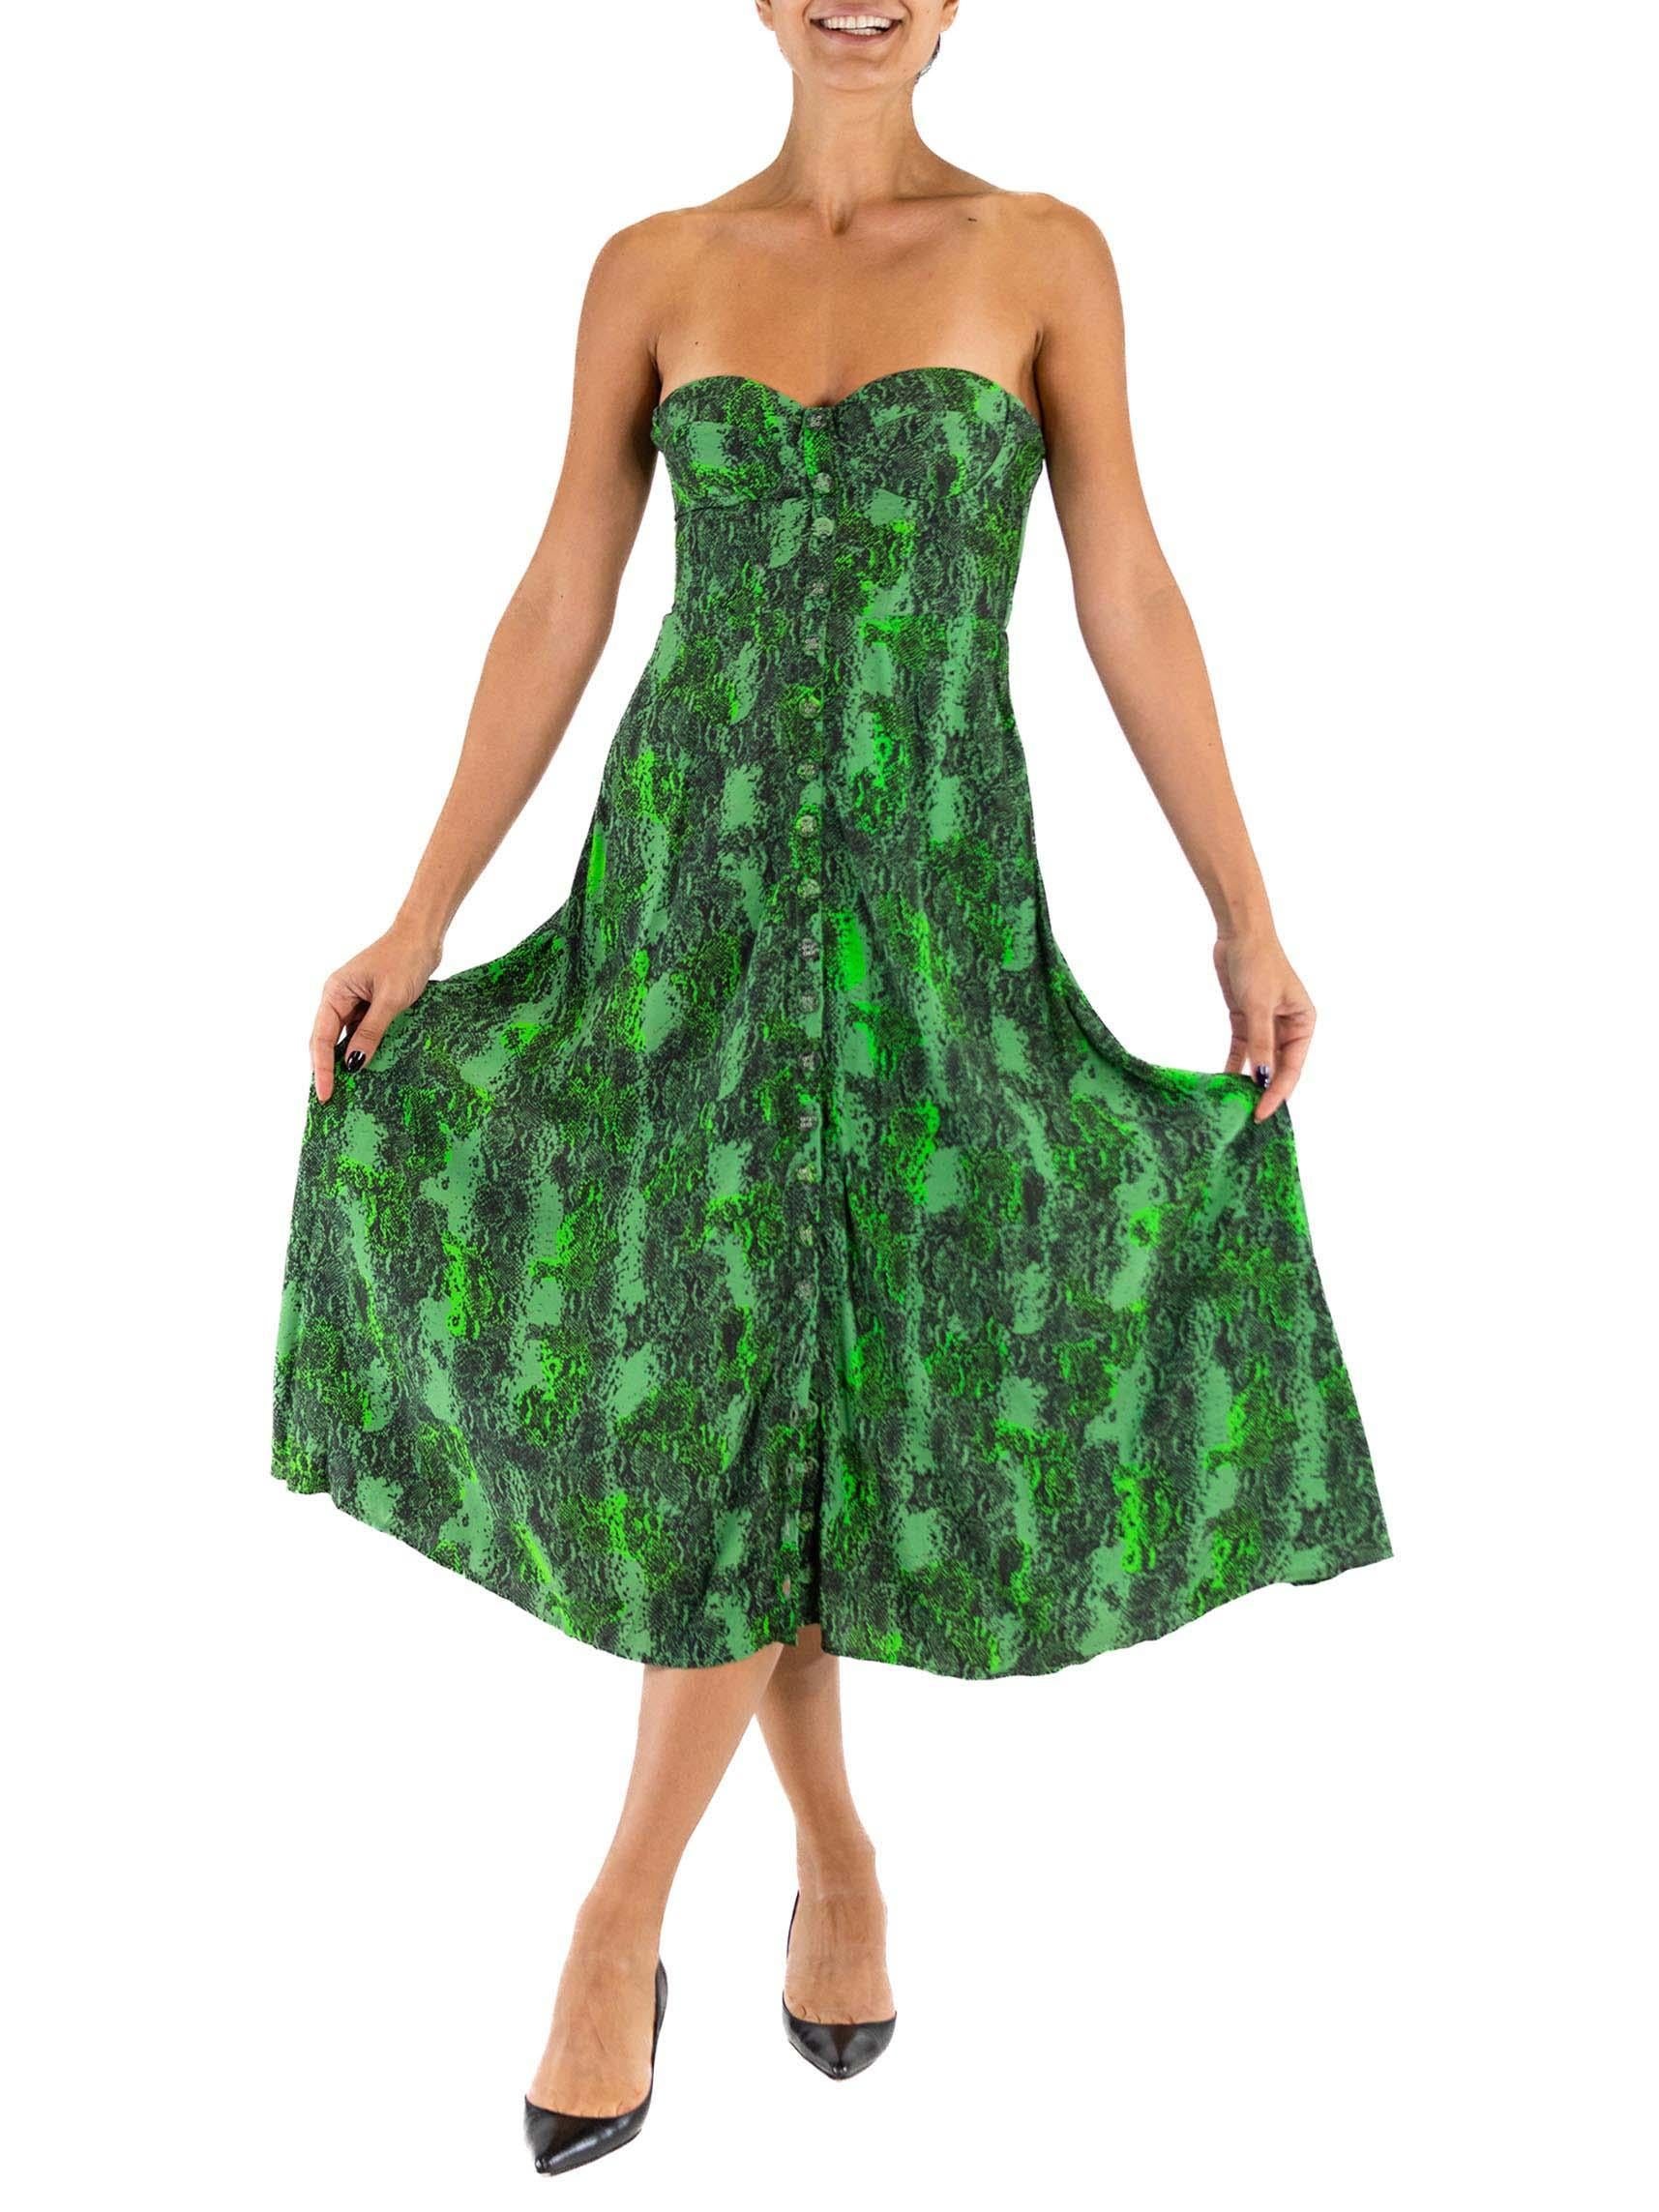 Women's 1990S ROTATE Green Rayon  Snake Print Strapless Bustier Dress With Pockets For Sale